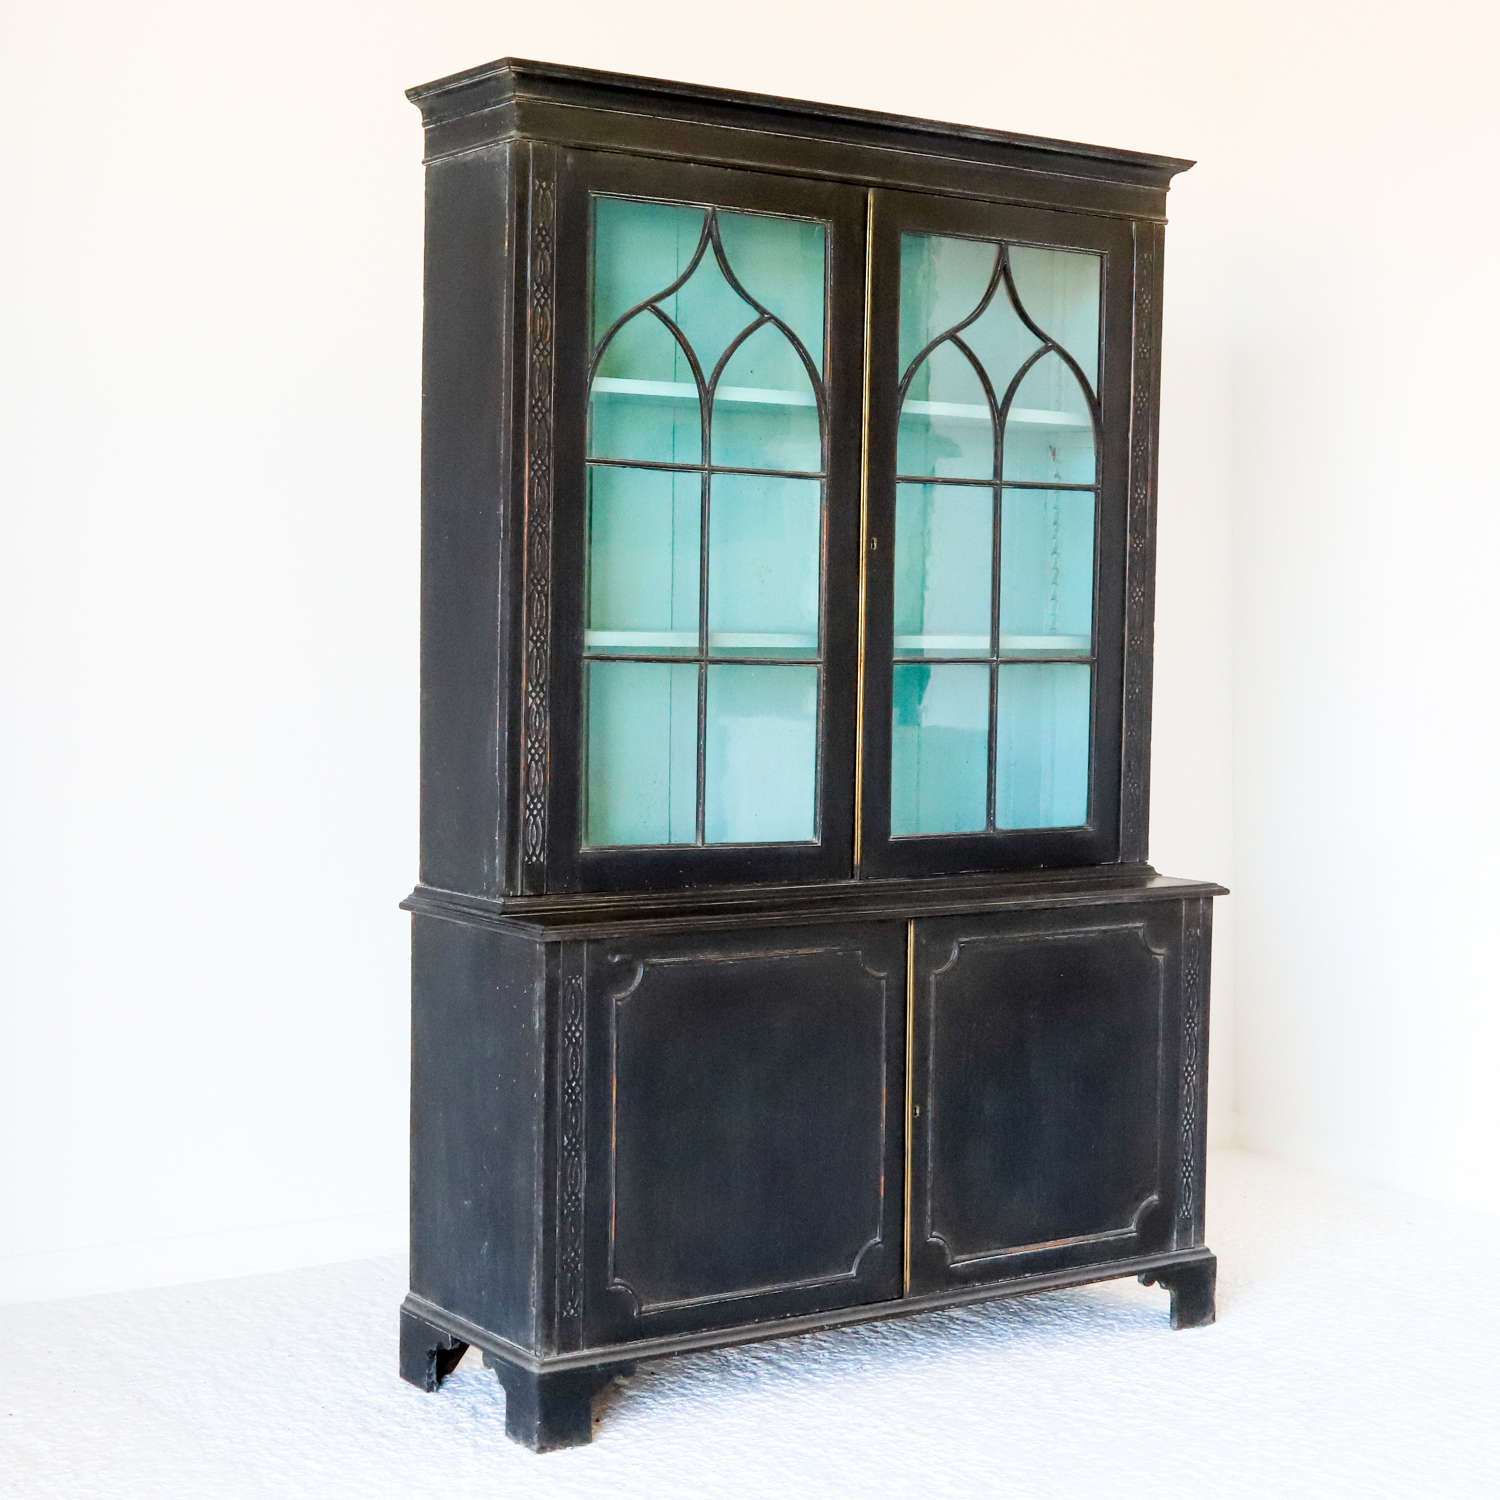 Antique black painted bookcase icy blue interior 2 adjustable shelves